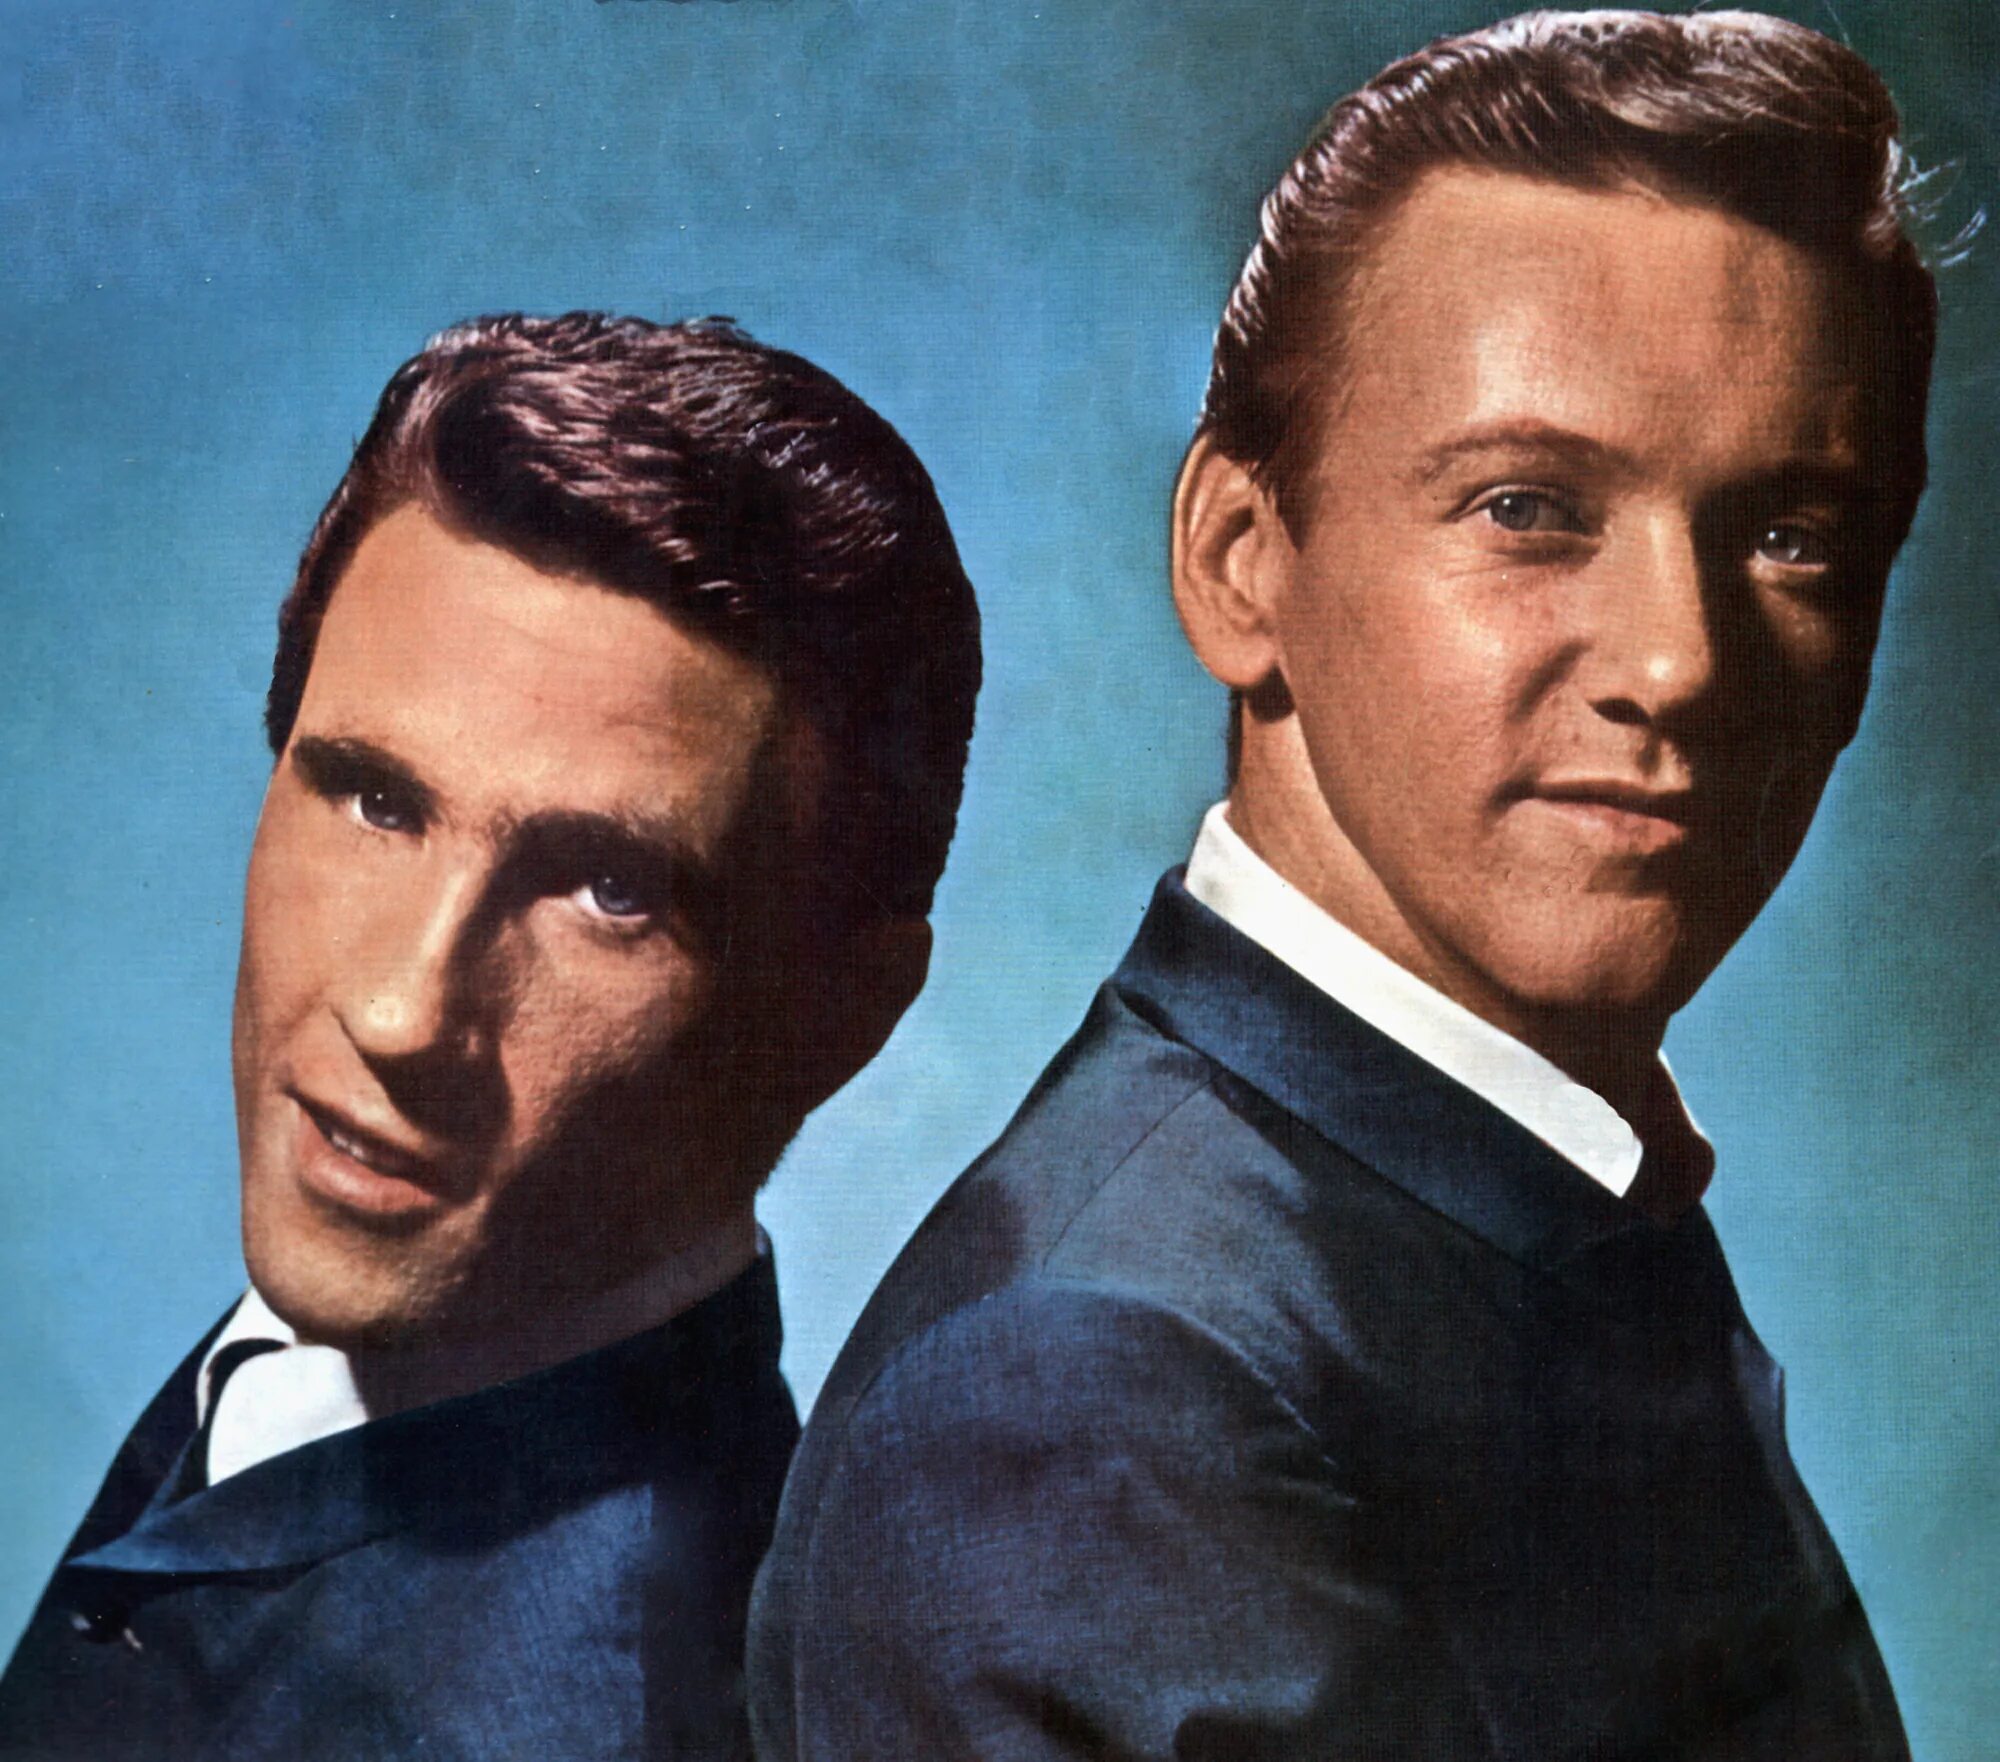 The righteous brothers unchained melody. Группа the Righteous brothers. Бобби Хэтфилд. Bobby Hatfield 1940.